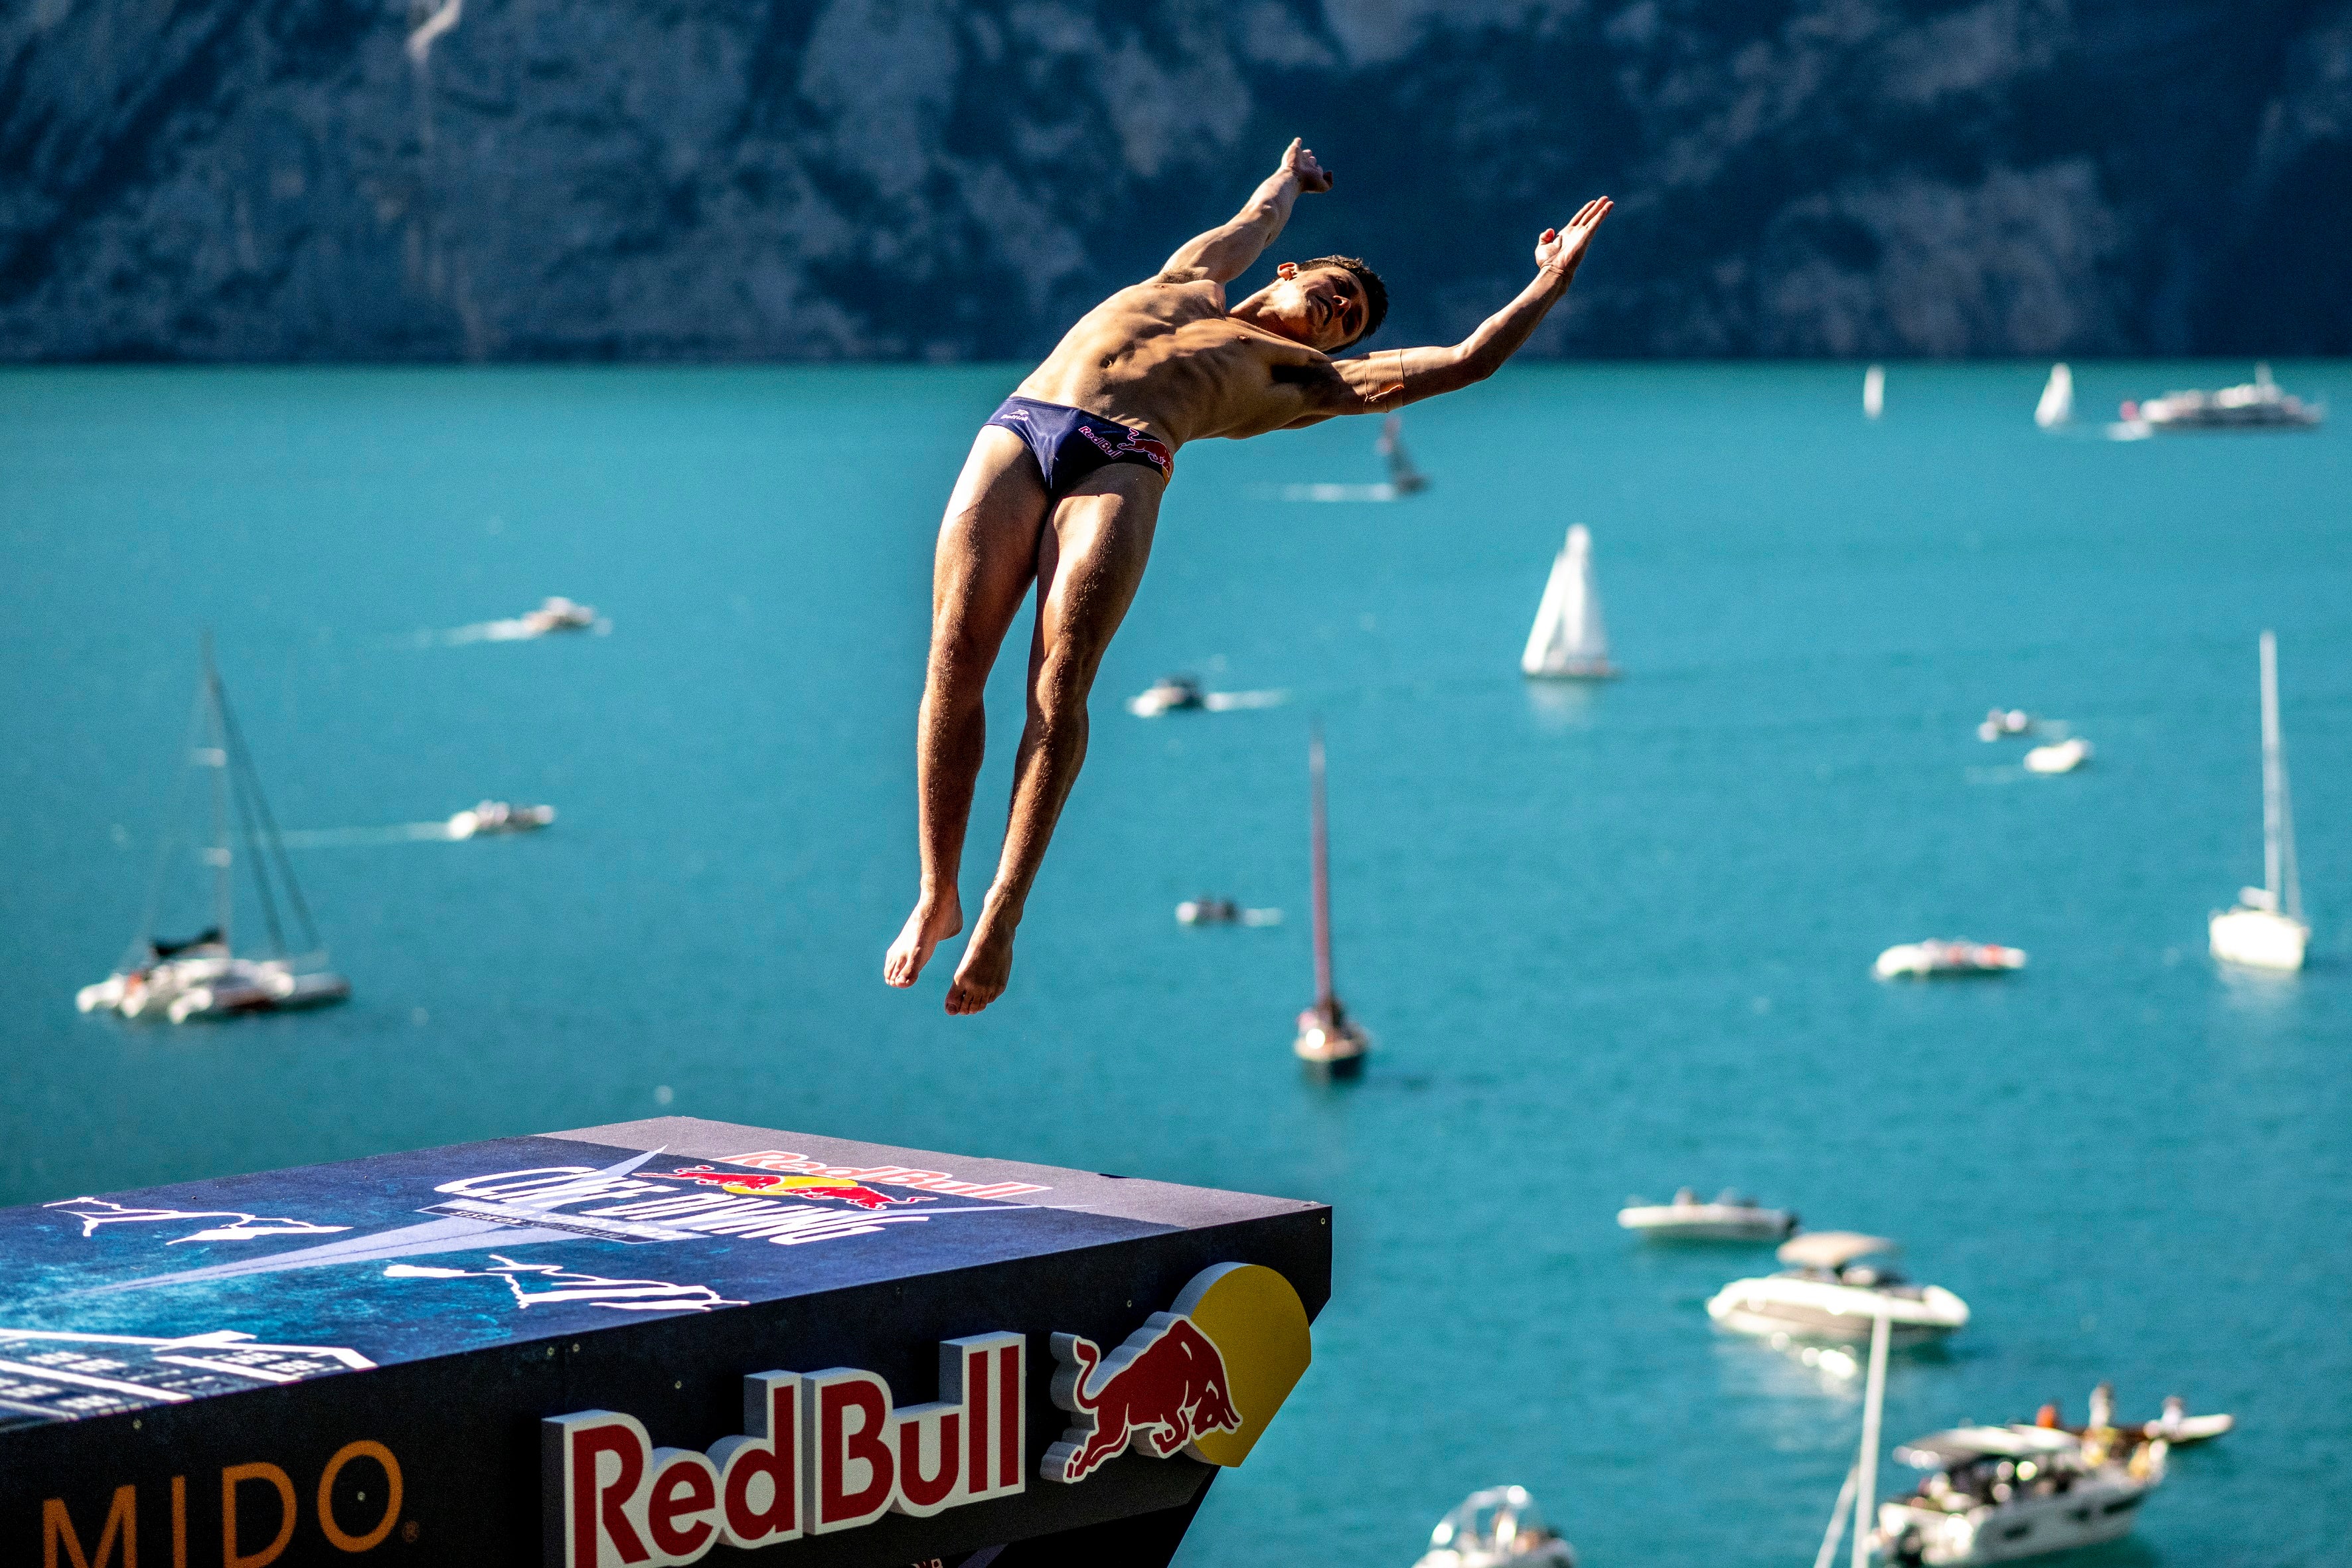 Briton says competing in cliff diving world event is a ‘dream come true